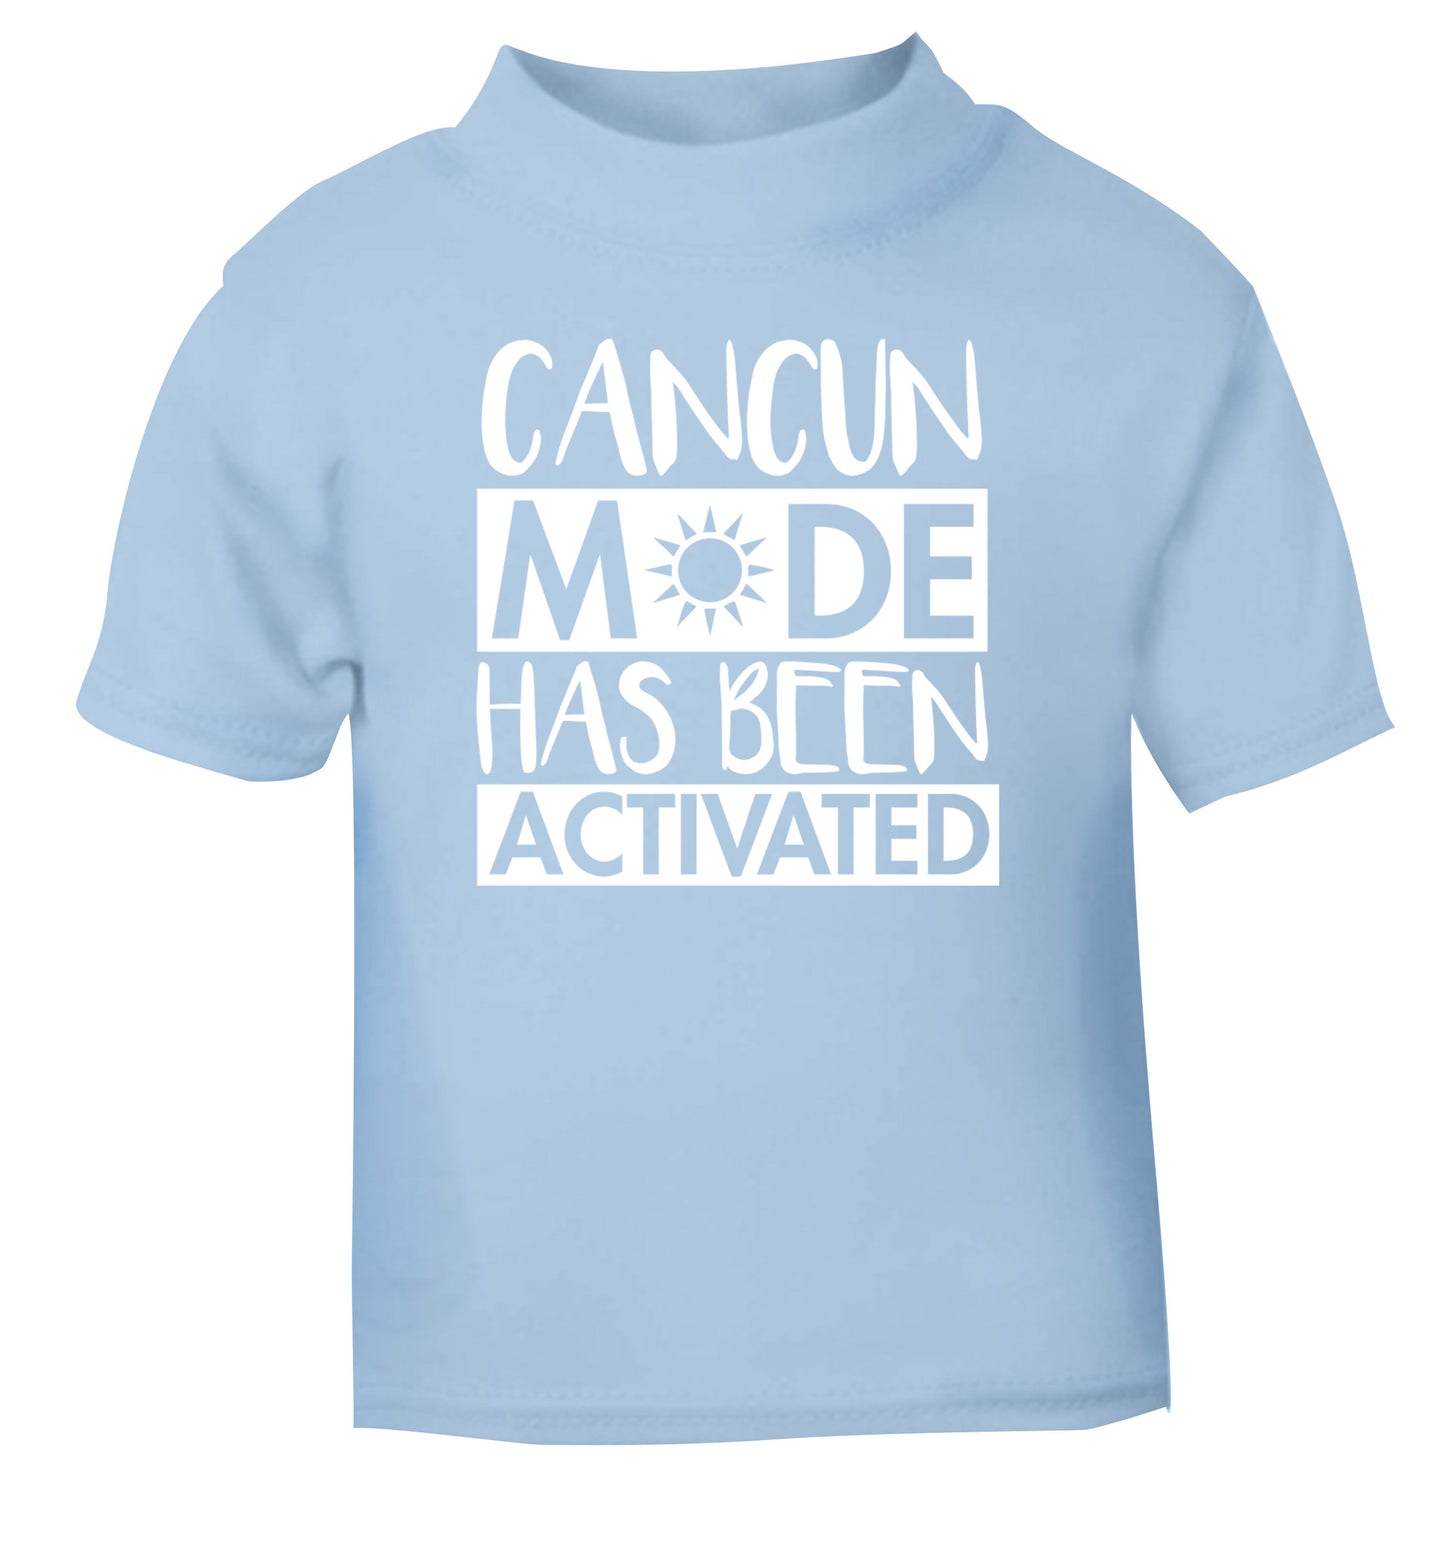 Cancun mode has been activated light blue Baby Toddler Tshirt 2 Years